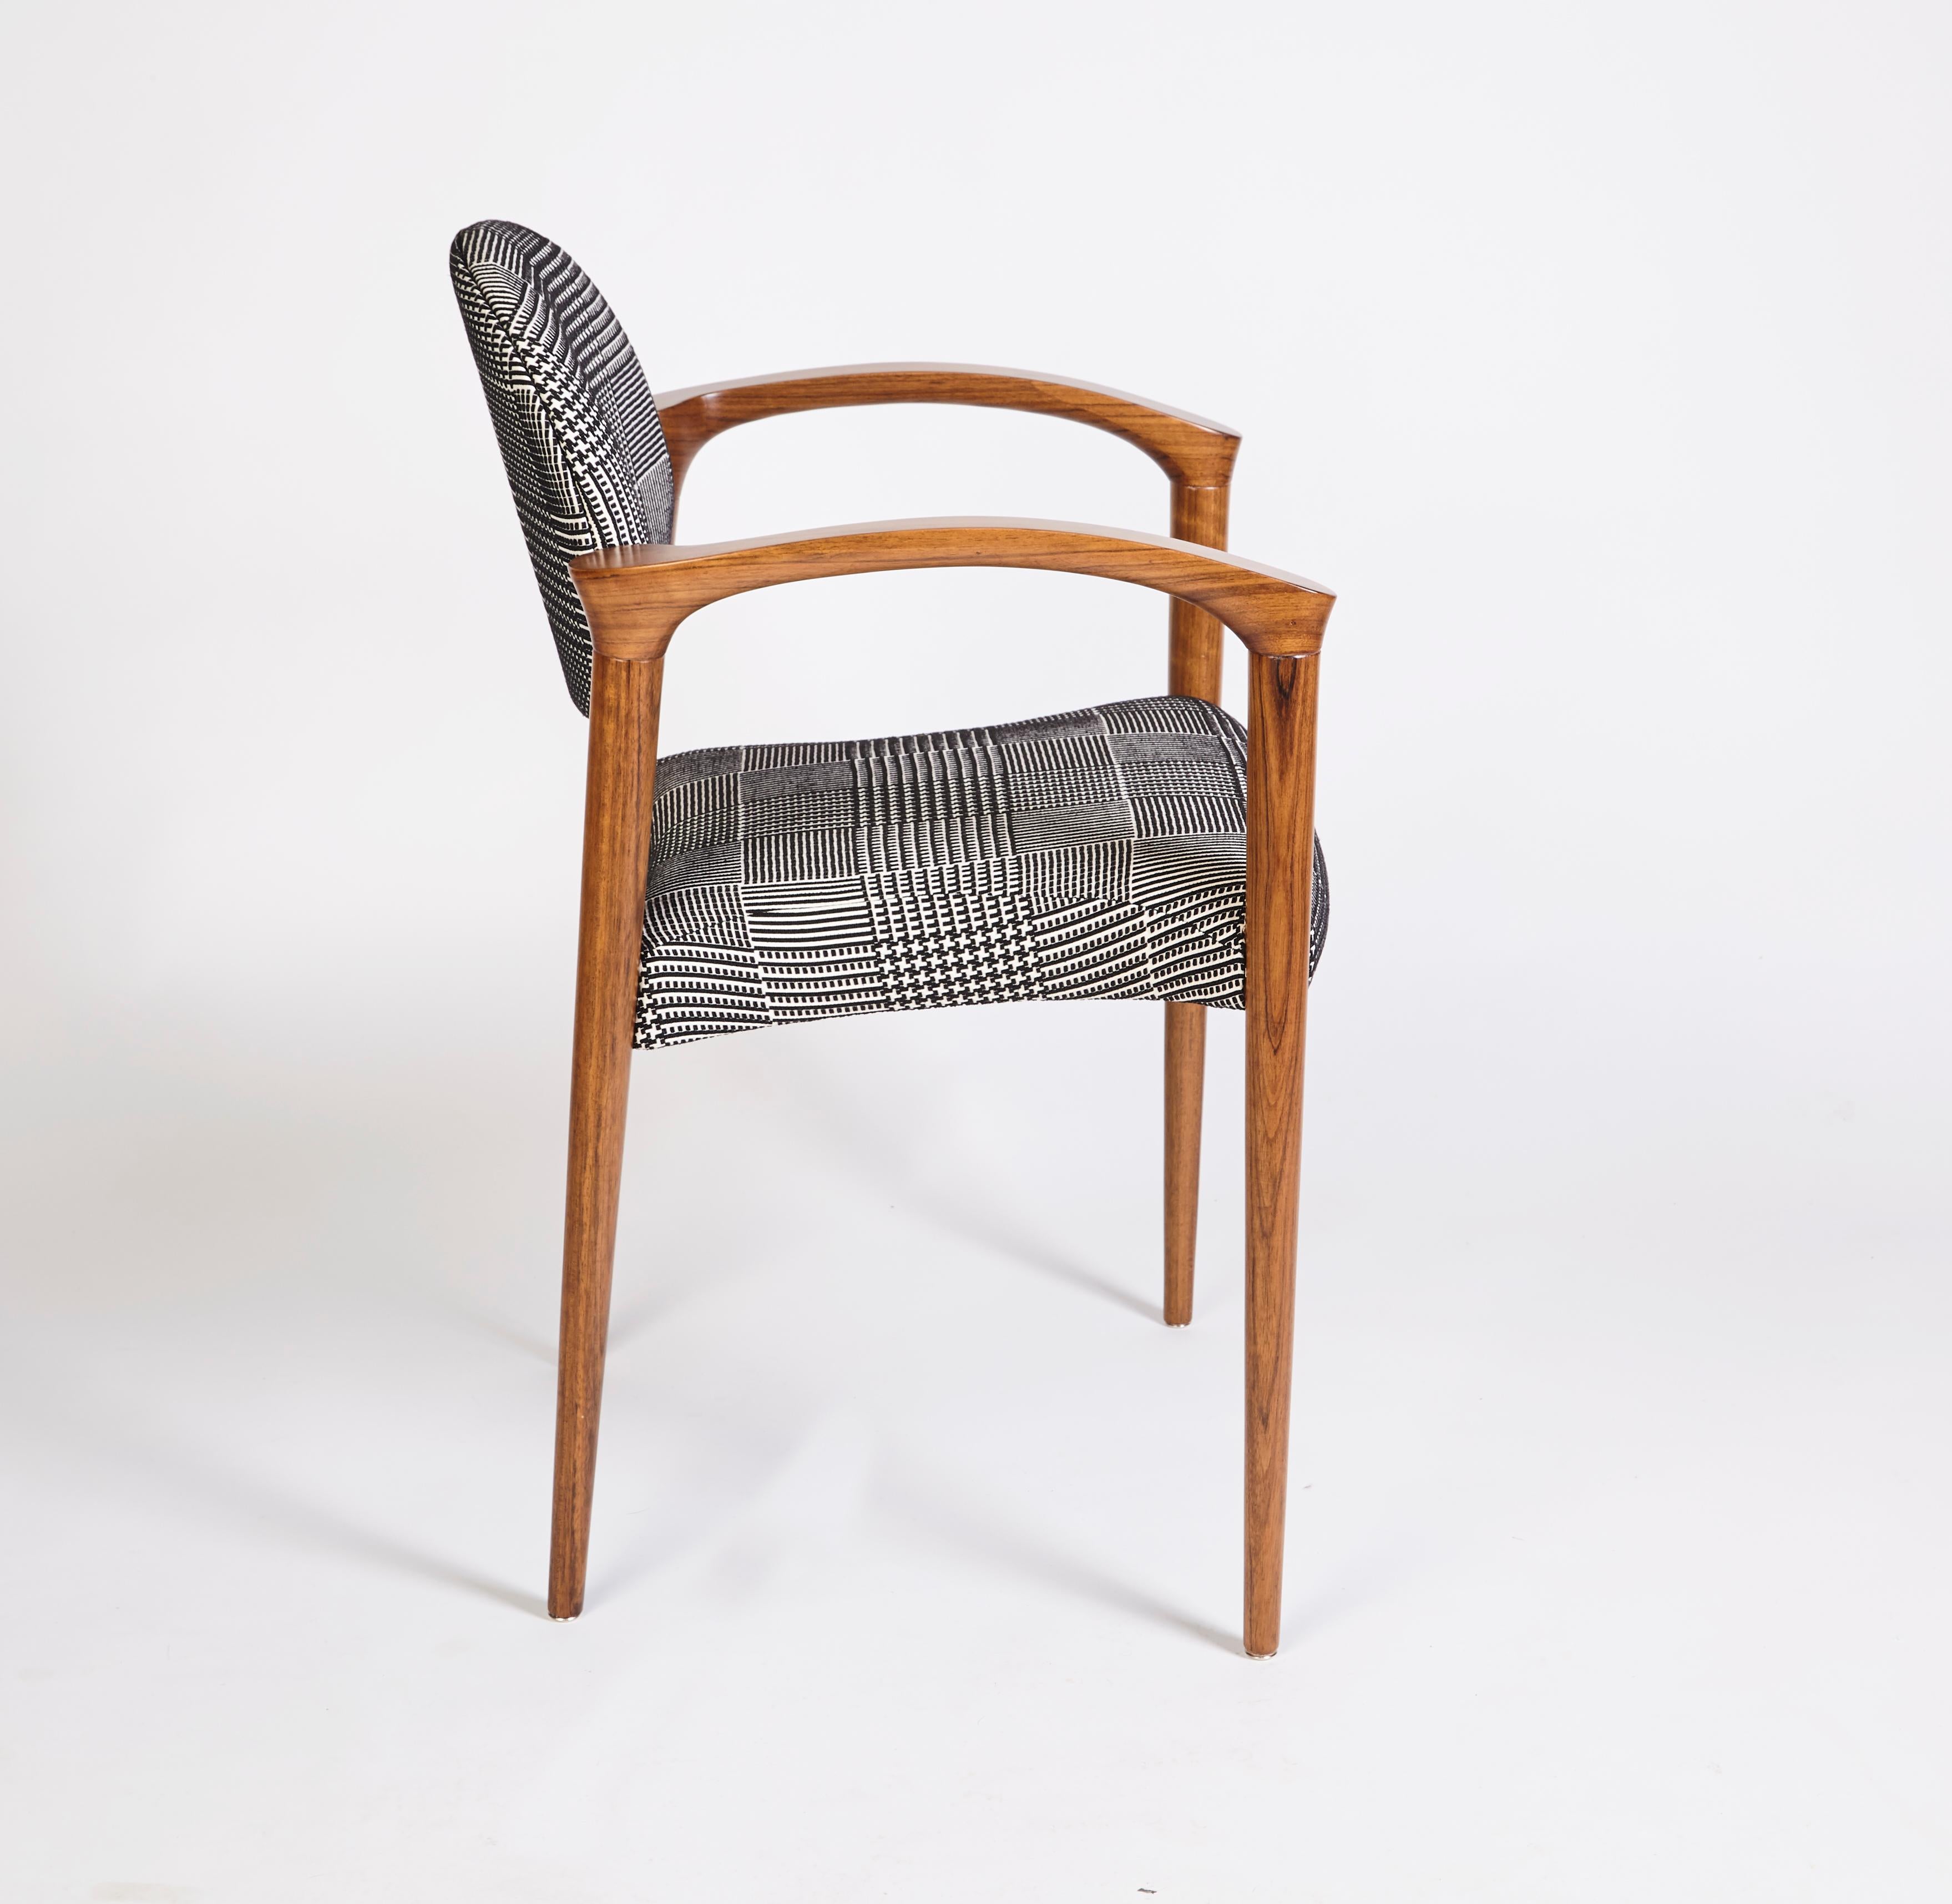 Tanoco Chair, Satin Mutenye Wood, Handcrafted in Portugal by Duistt

Tanoco chair is inspired by the mid century architecture and interior design, with its long arches creating simultaniously a sensation of stability and movement. The name tanoco